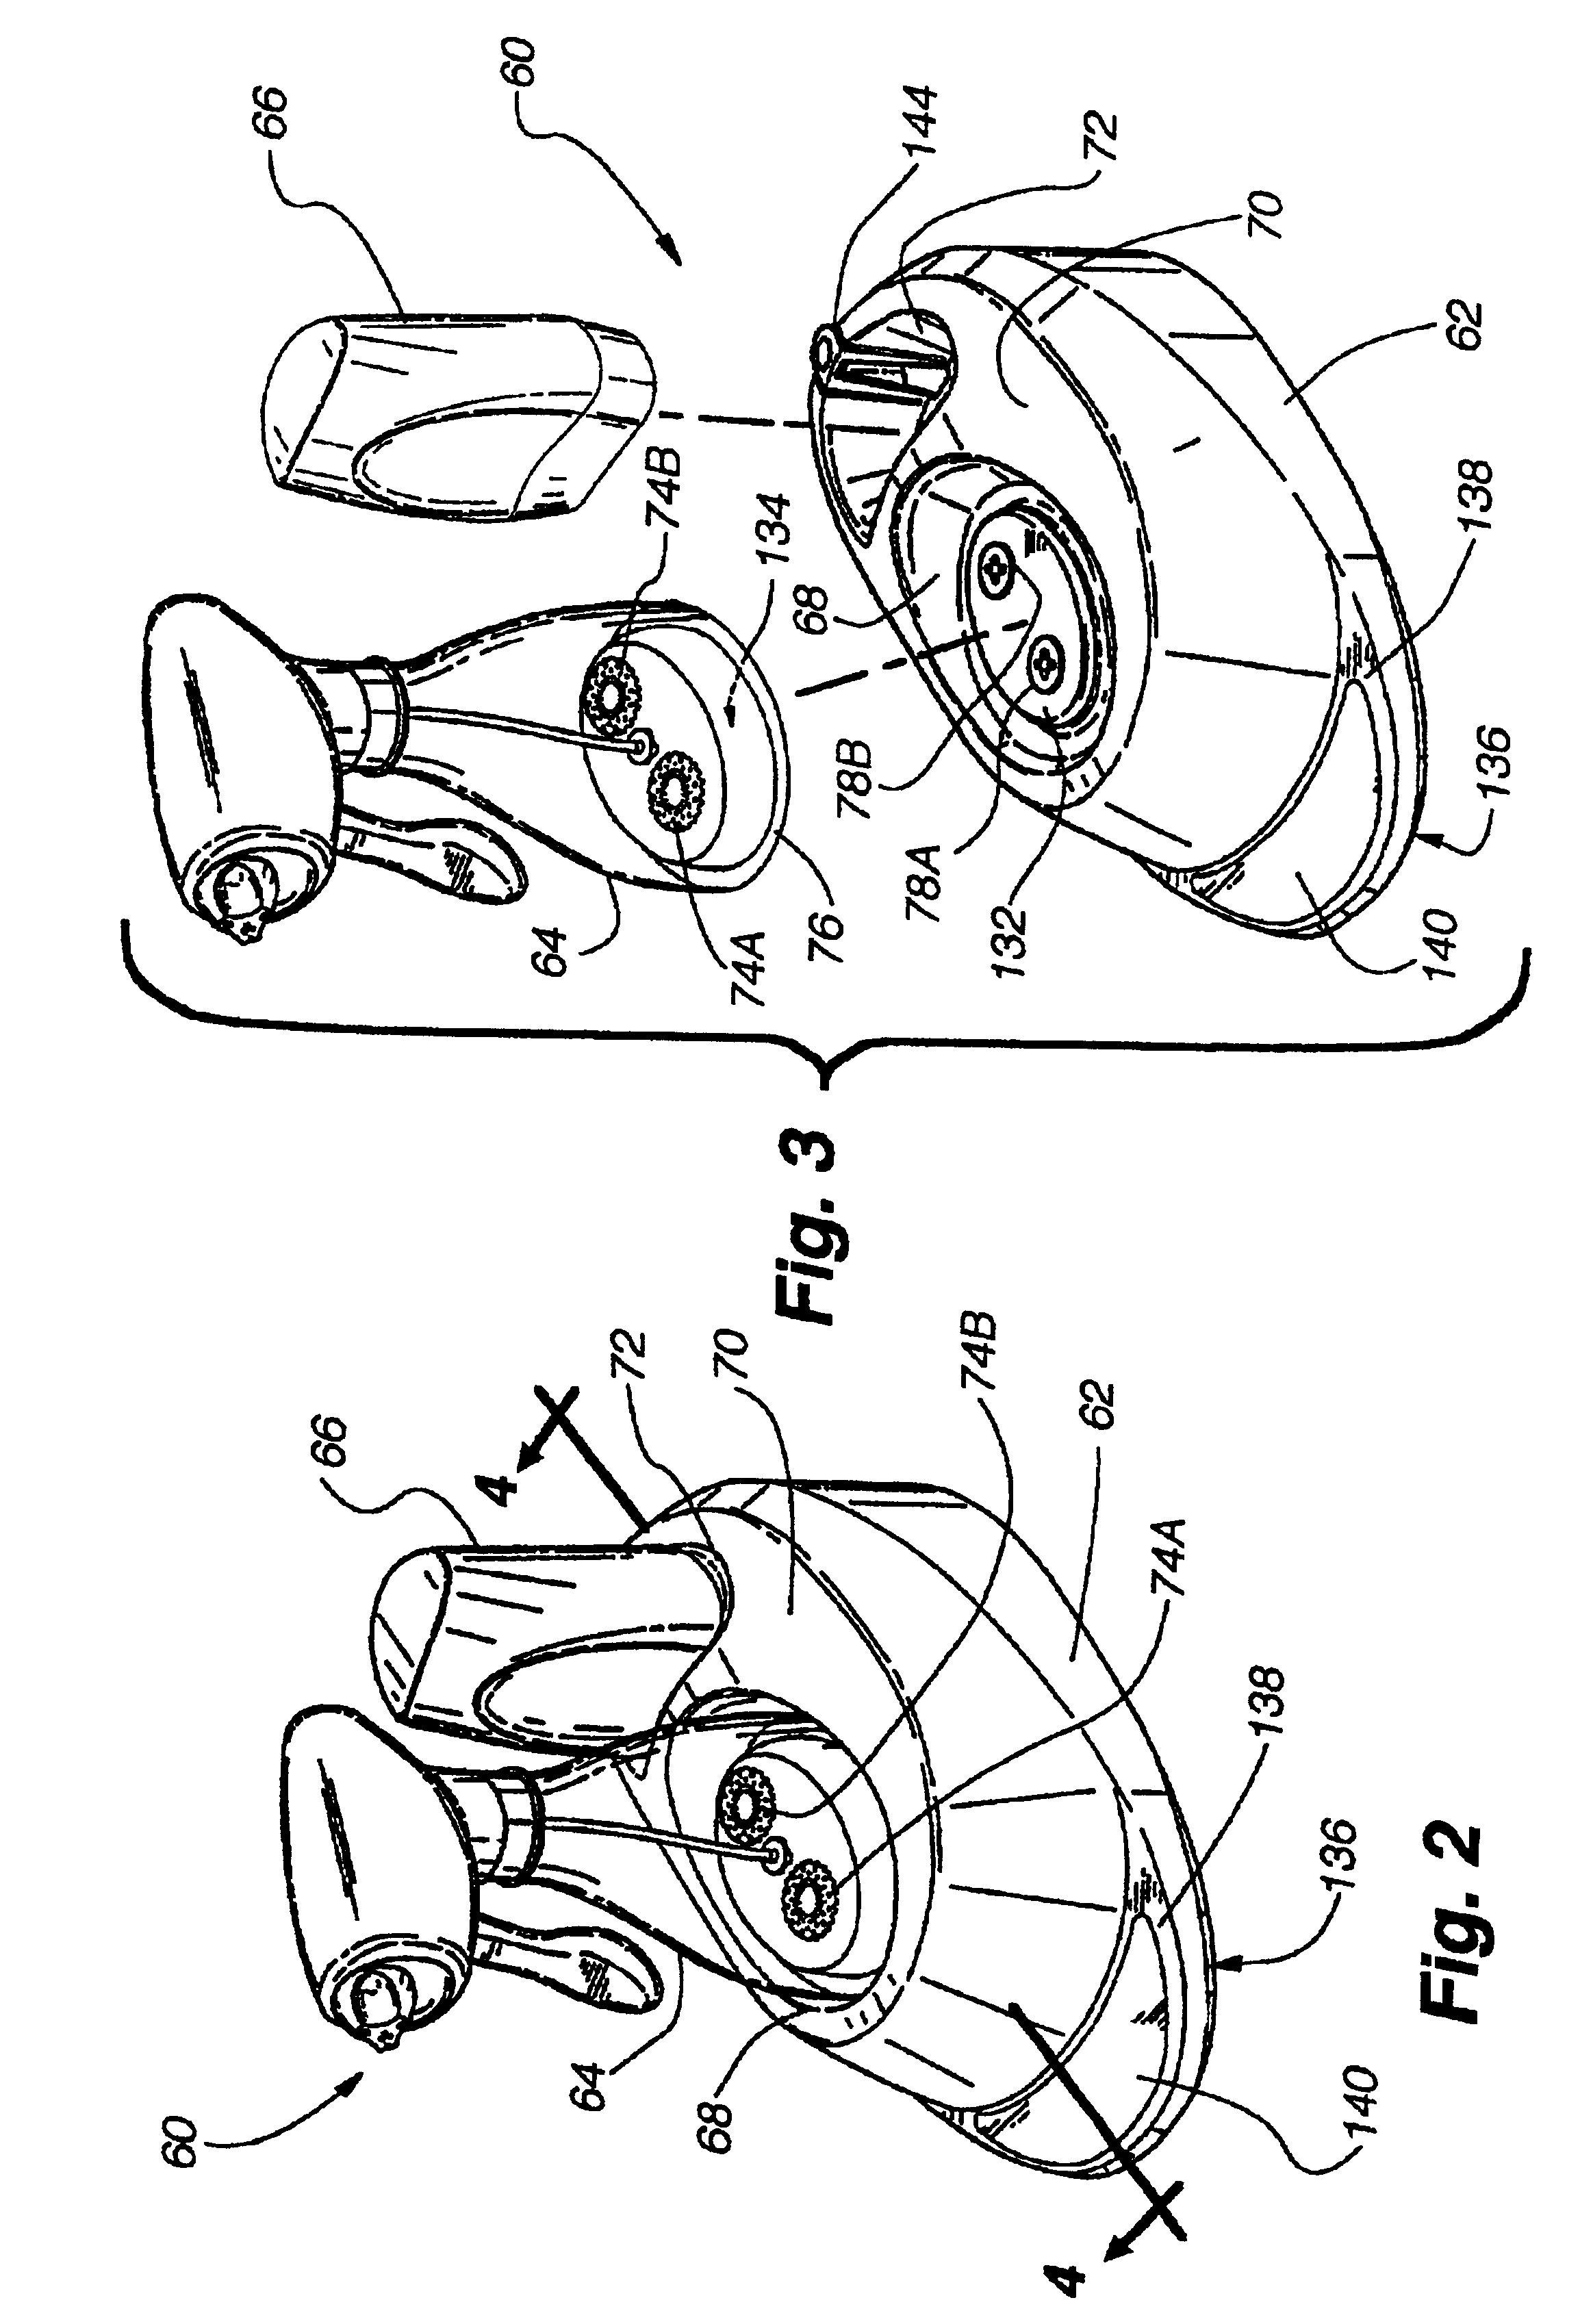 Device and method for generating and applying ozonated water